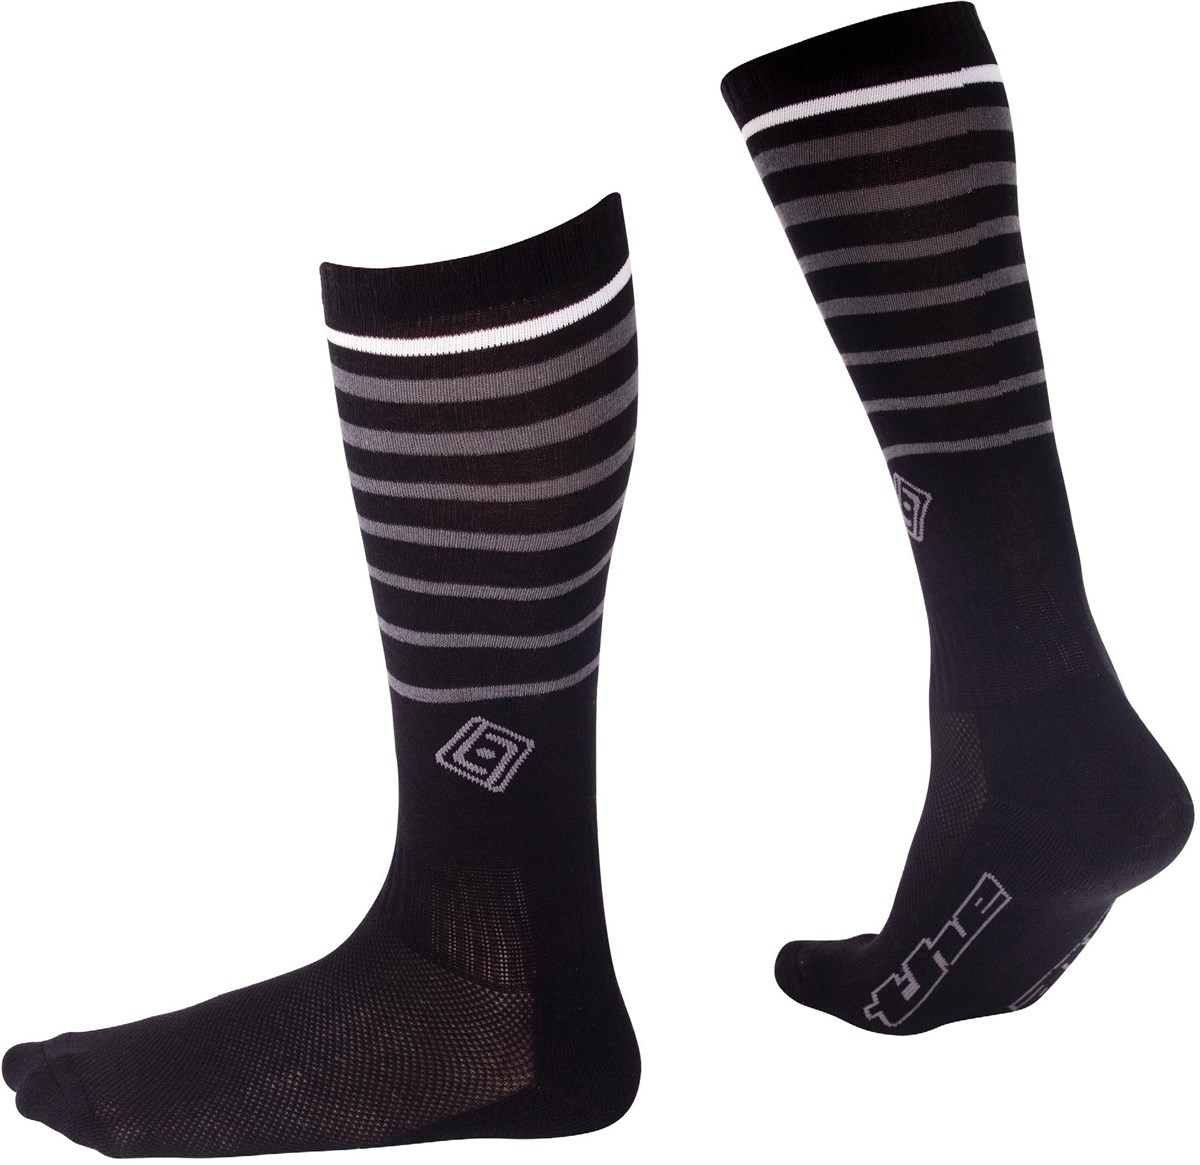 THE Industries Cosmo Socks